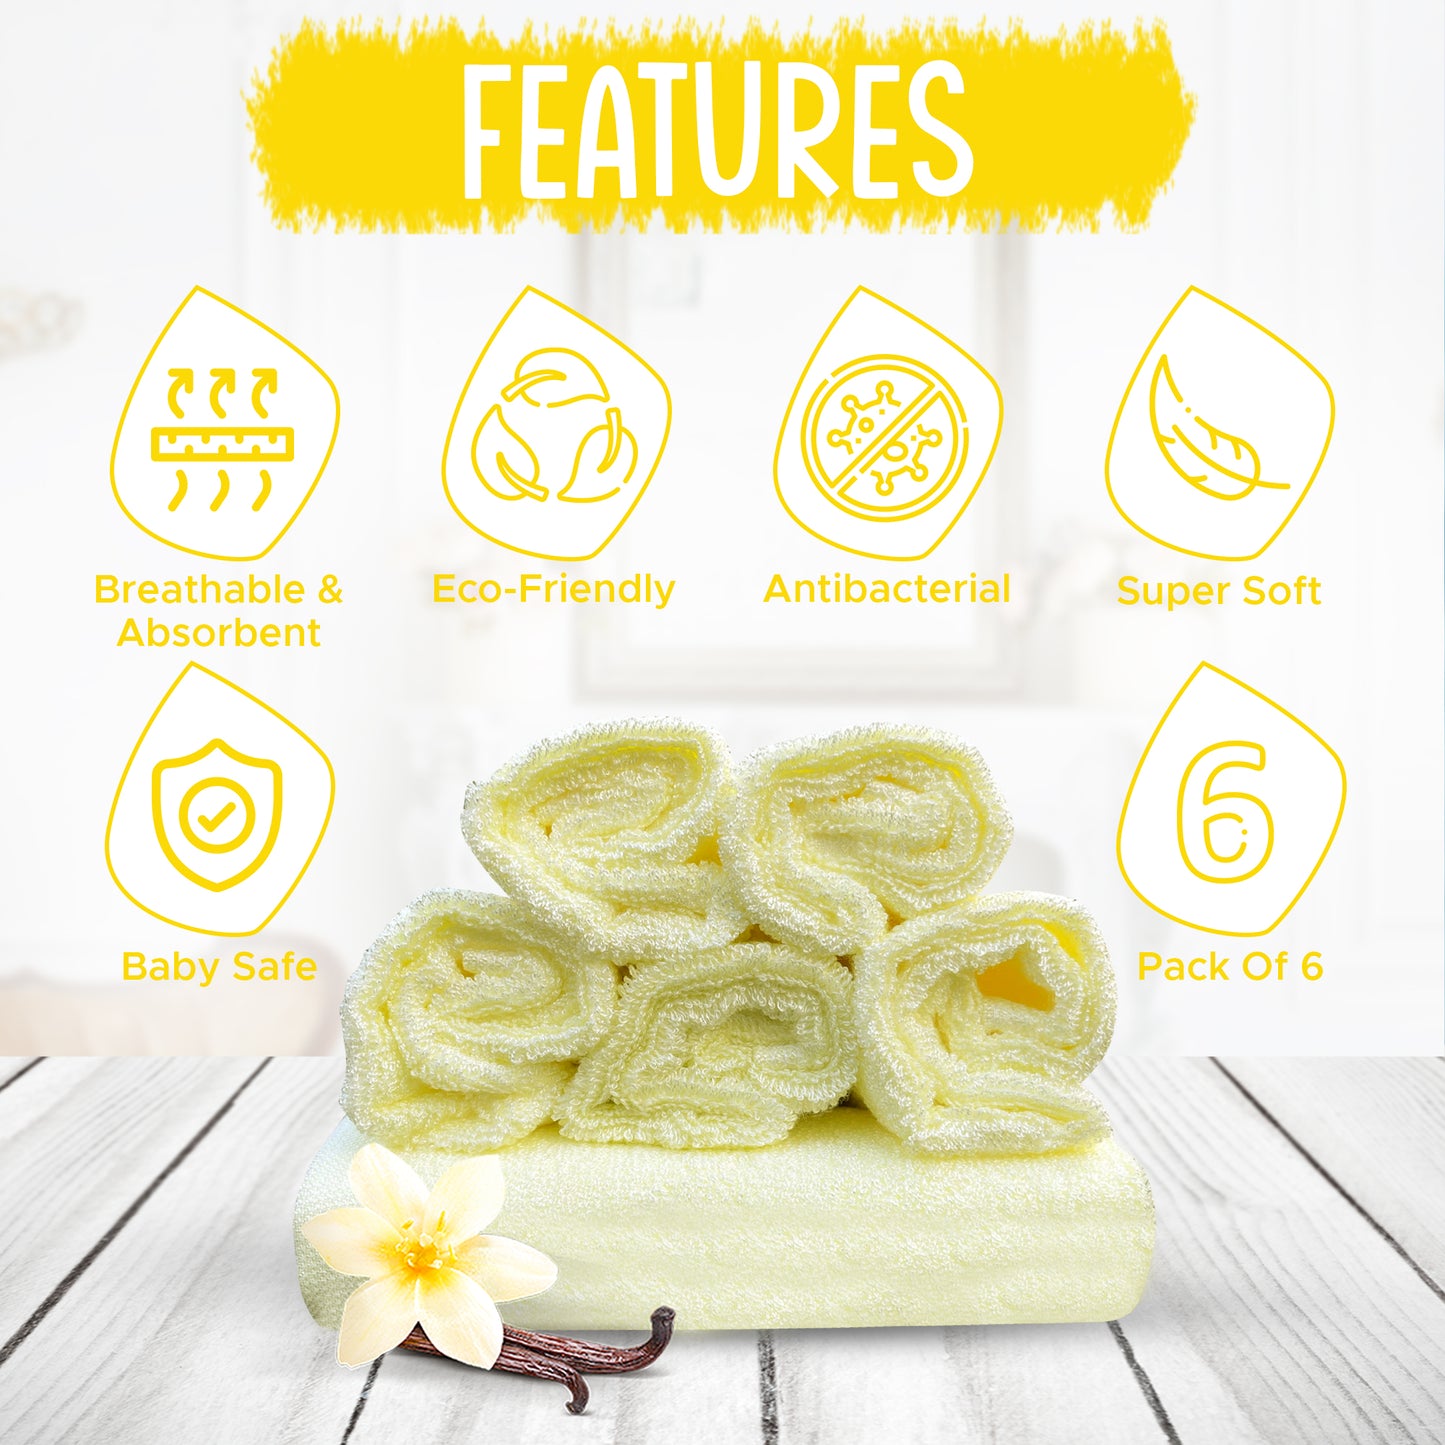 6 Premium Canary Yellow Bamboo Wash Cloths for Babies & Adults